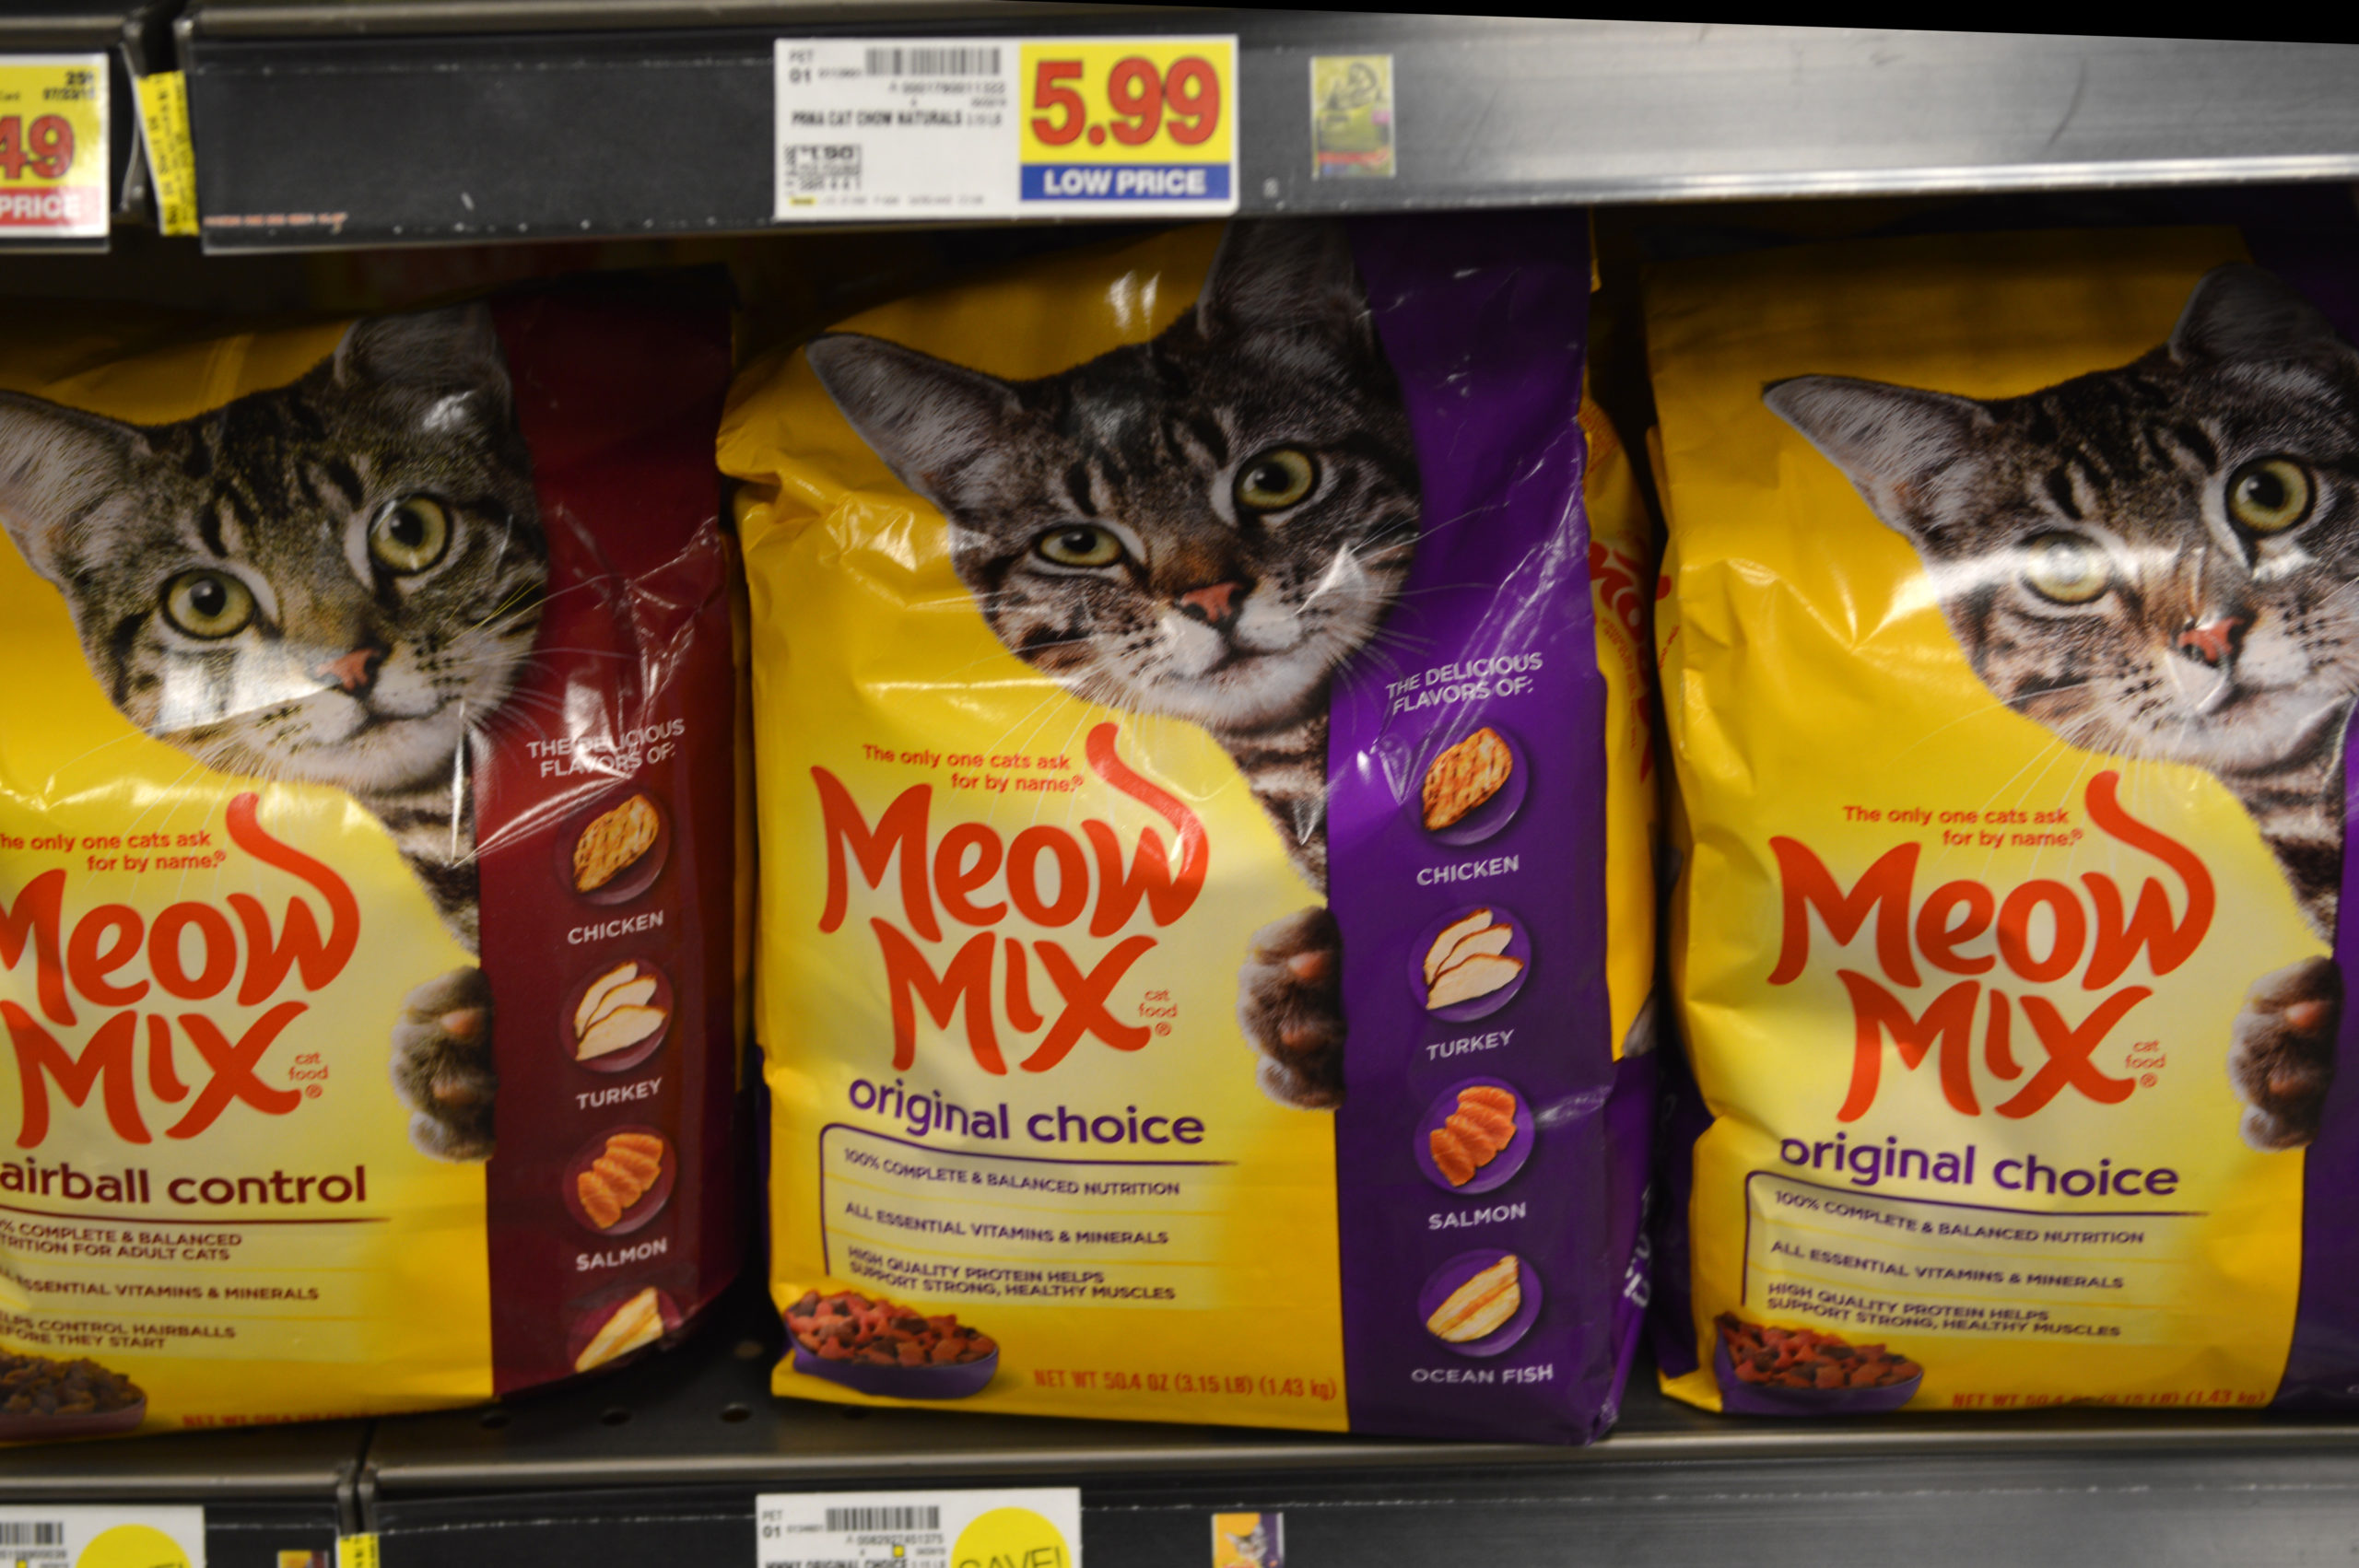 Meow Mix Cat Food Recall Issued Over Salmonella Poisoning Risks